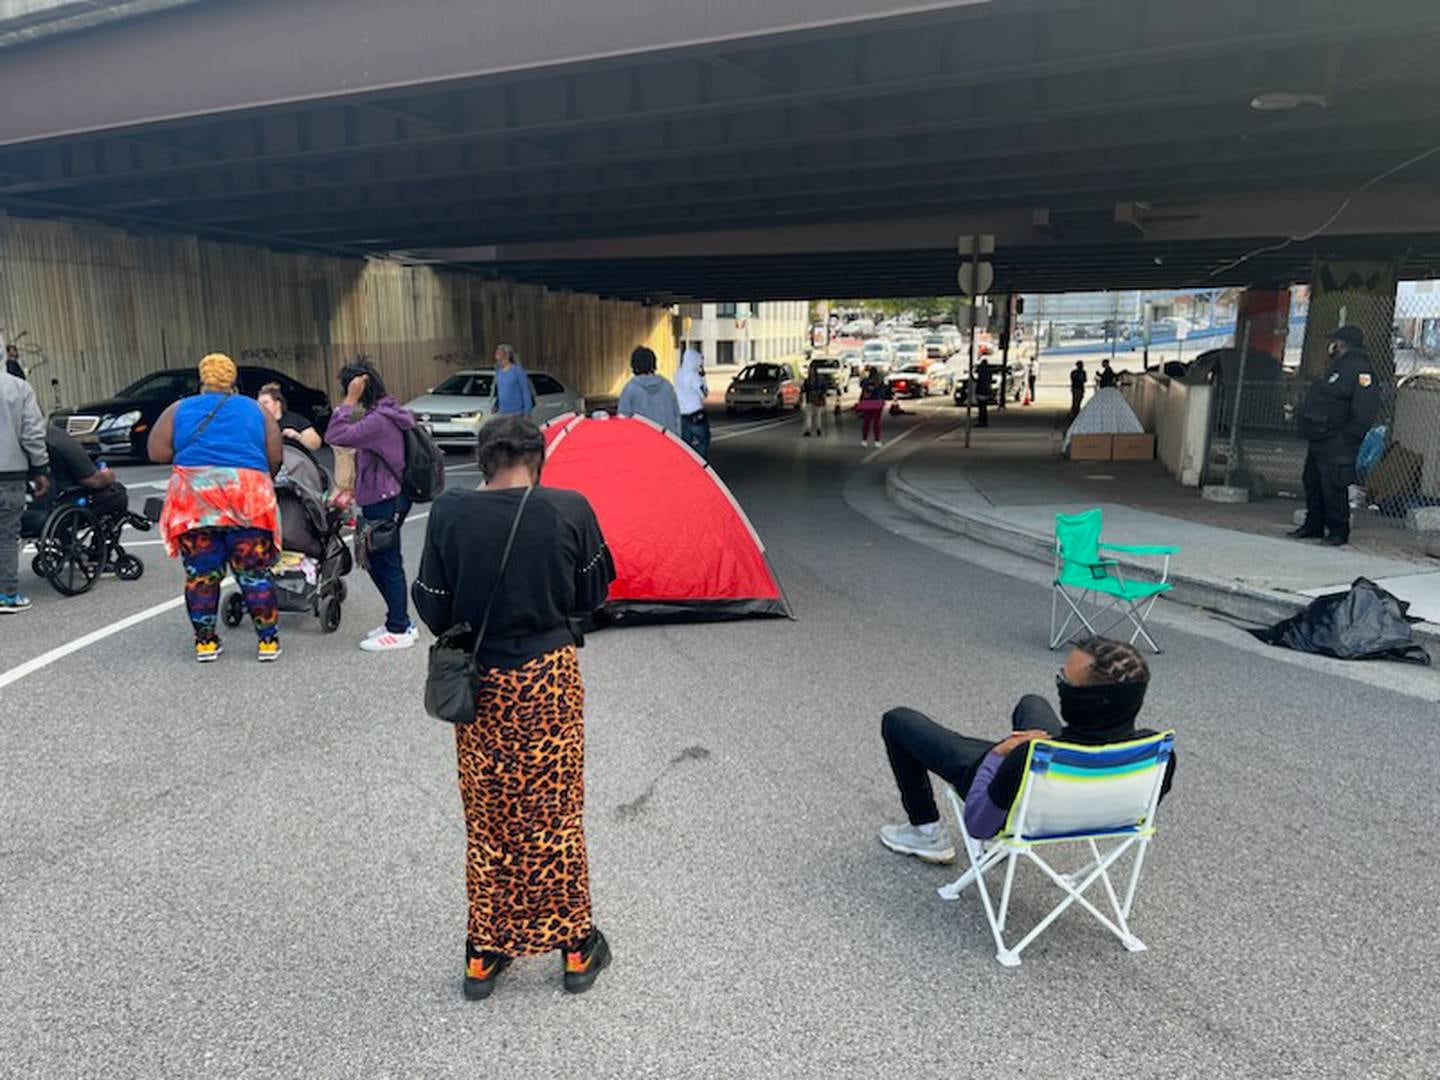 People standing in the road blocking traffic. One person is sitting in a chair. Tents are visible in the background.